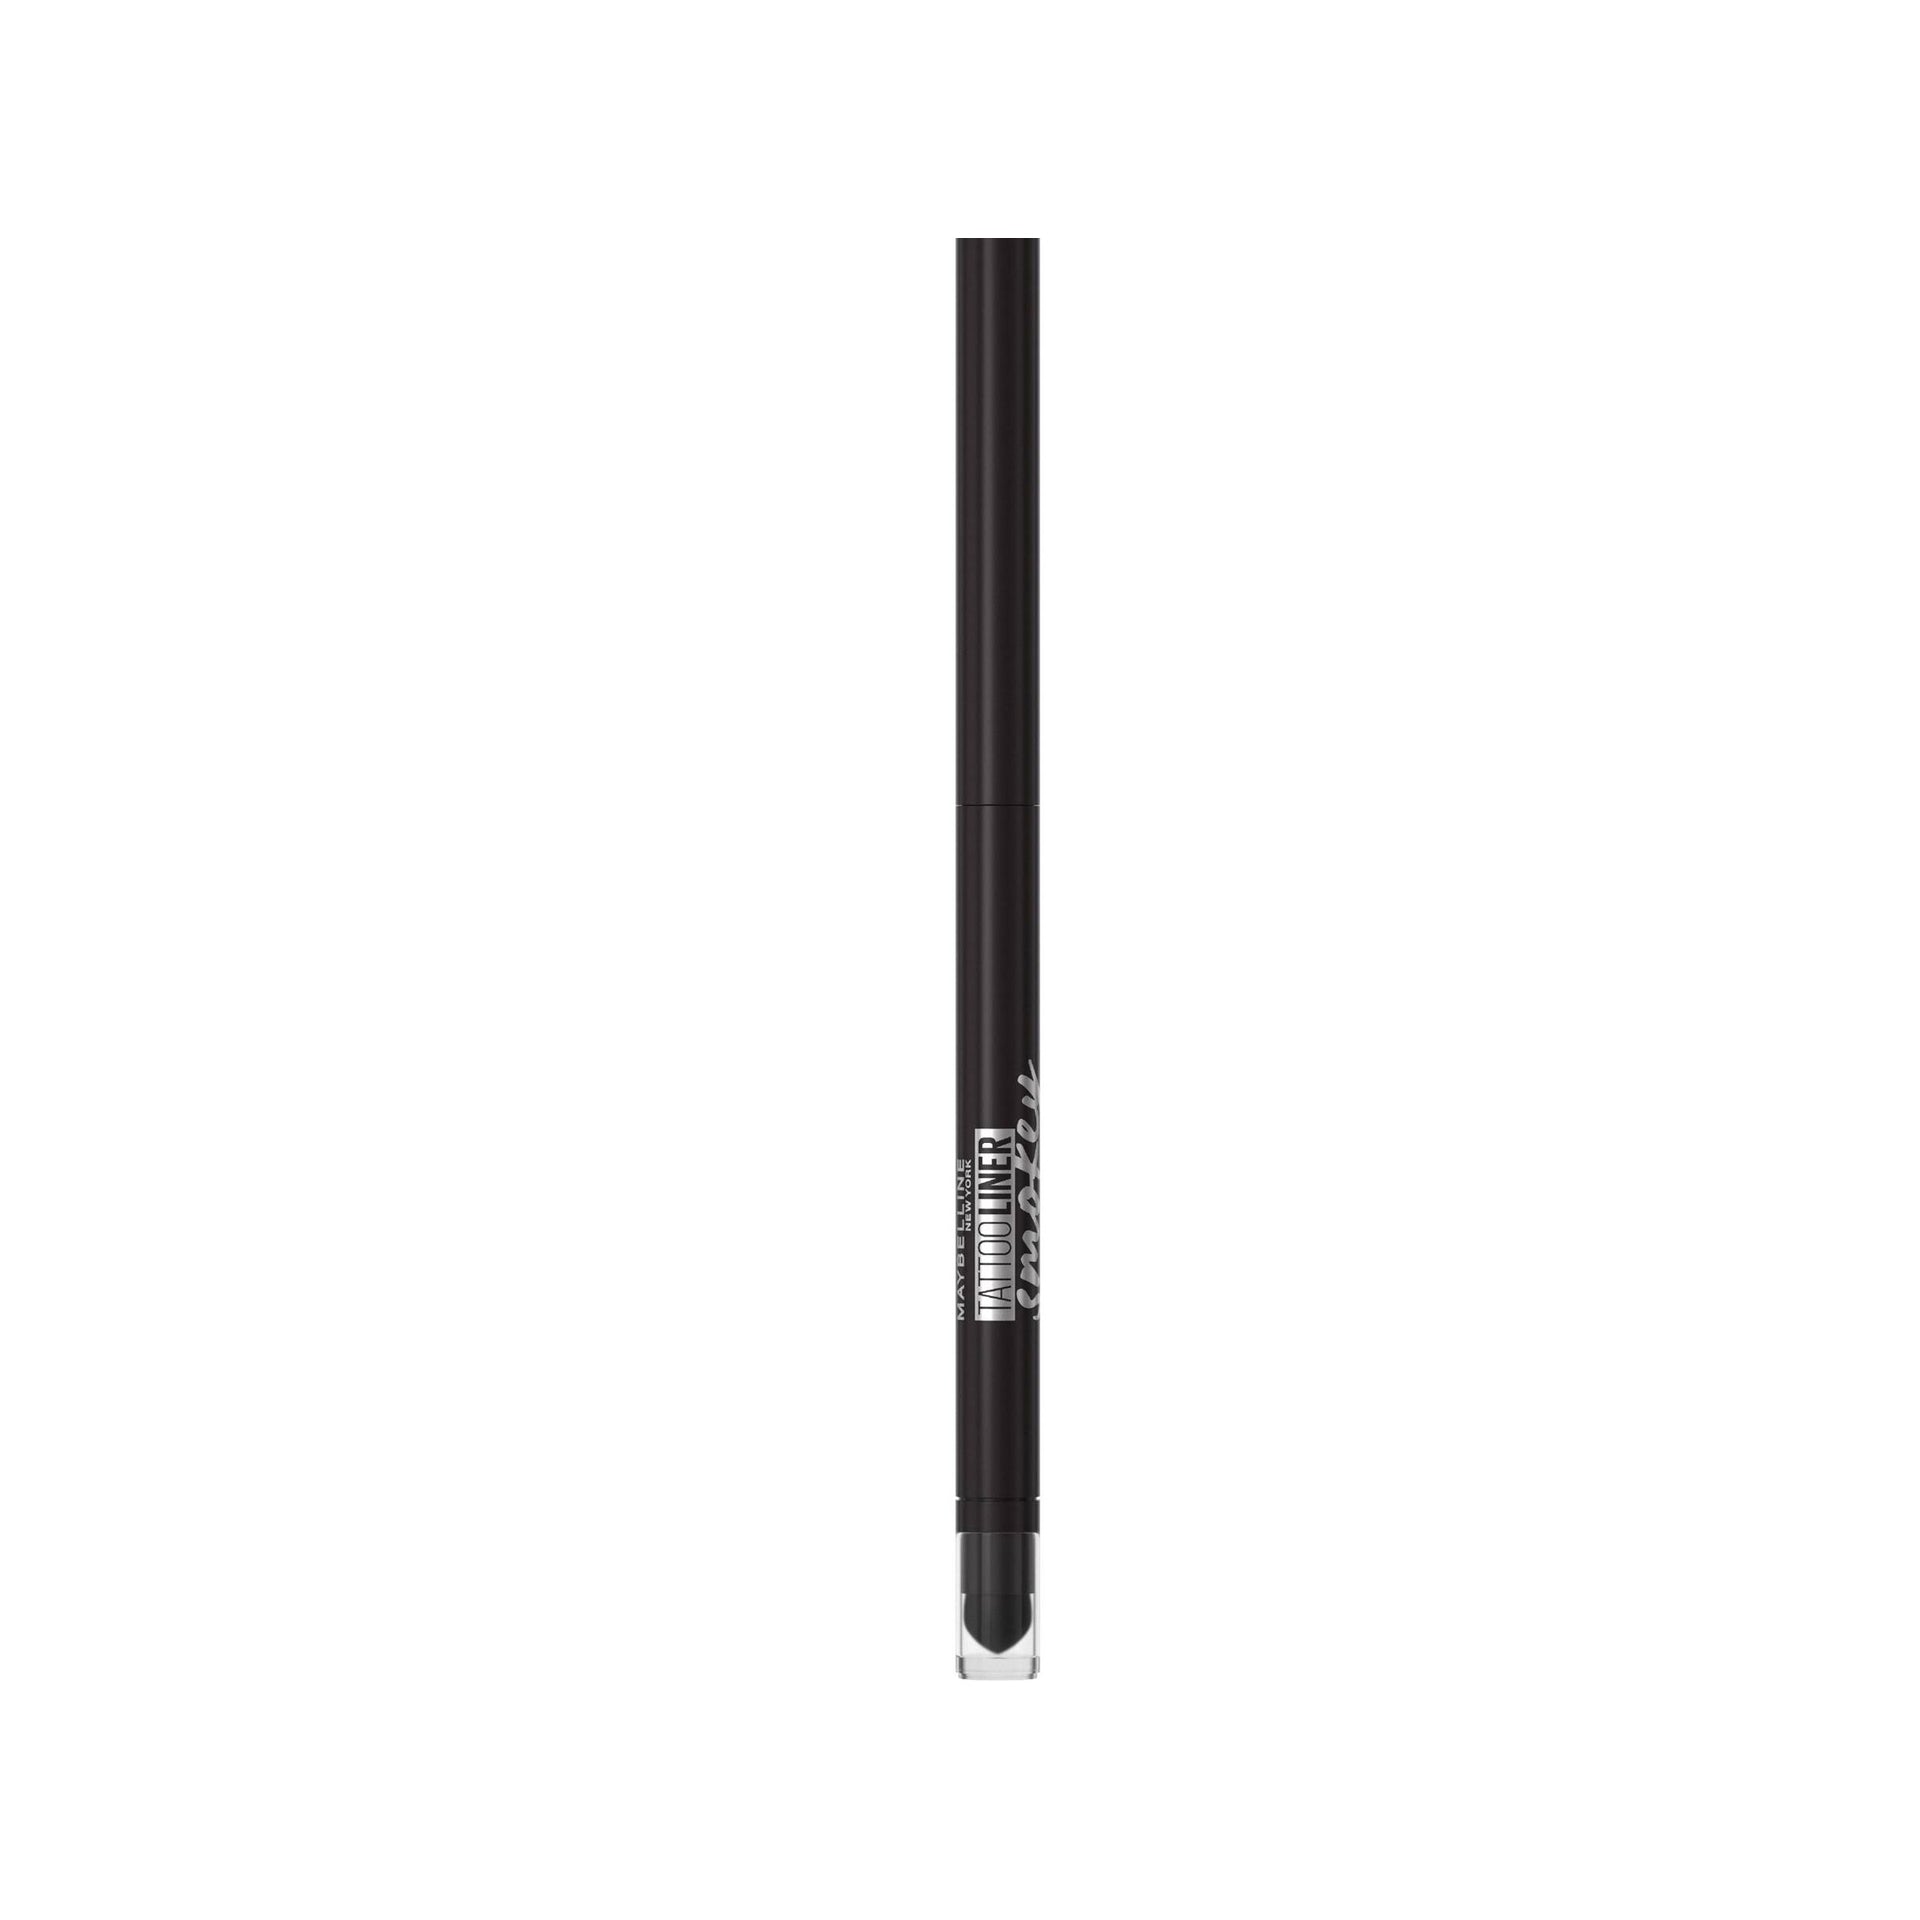 Crayon pour les yeux Maybelline Tattoo Liner n° 010 Smokey Black